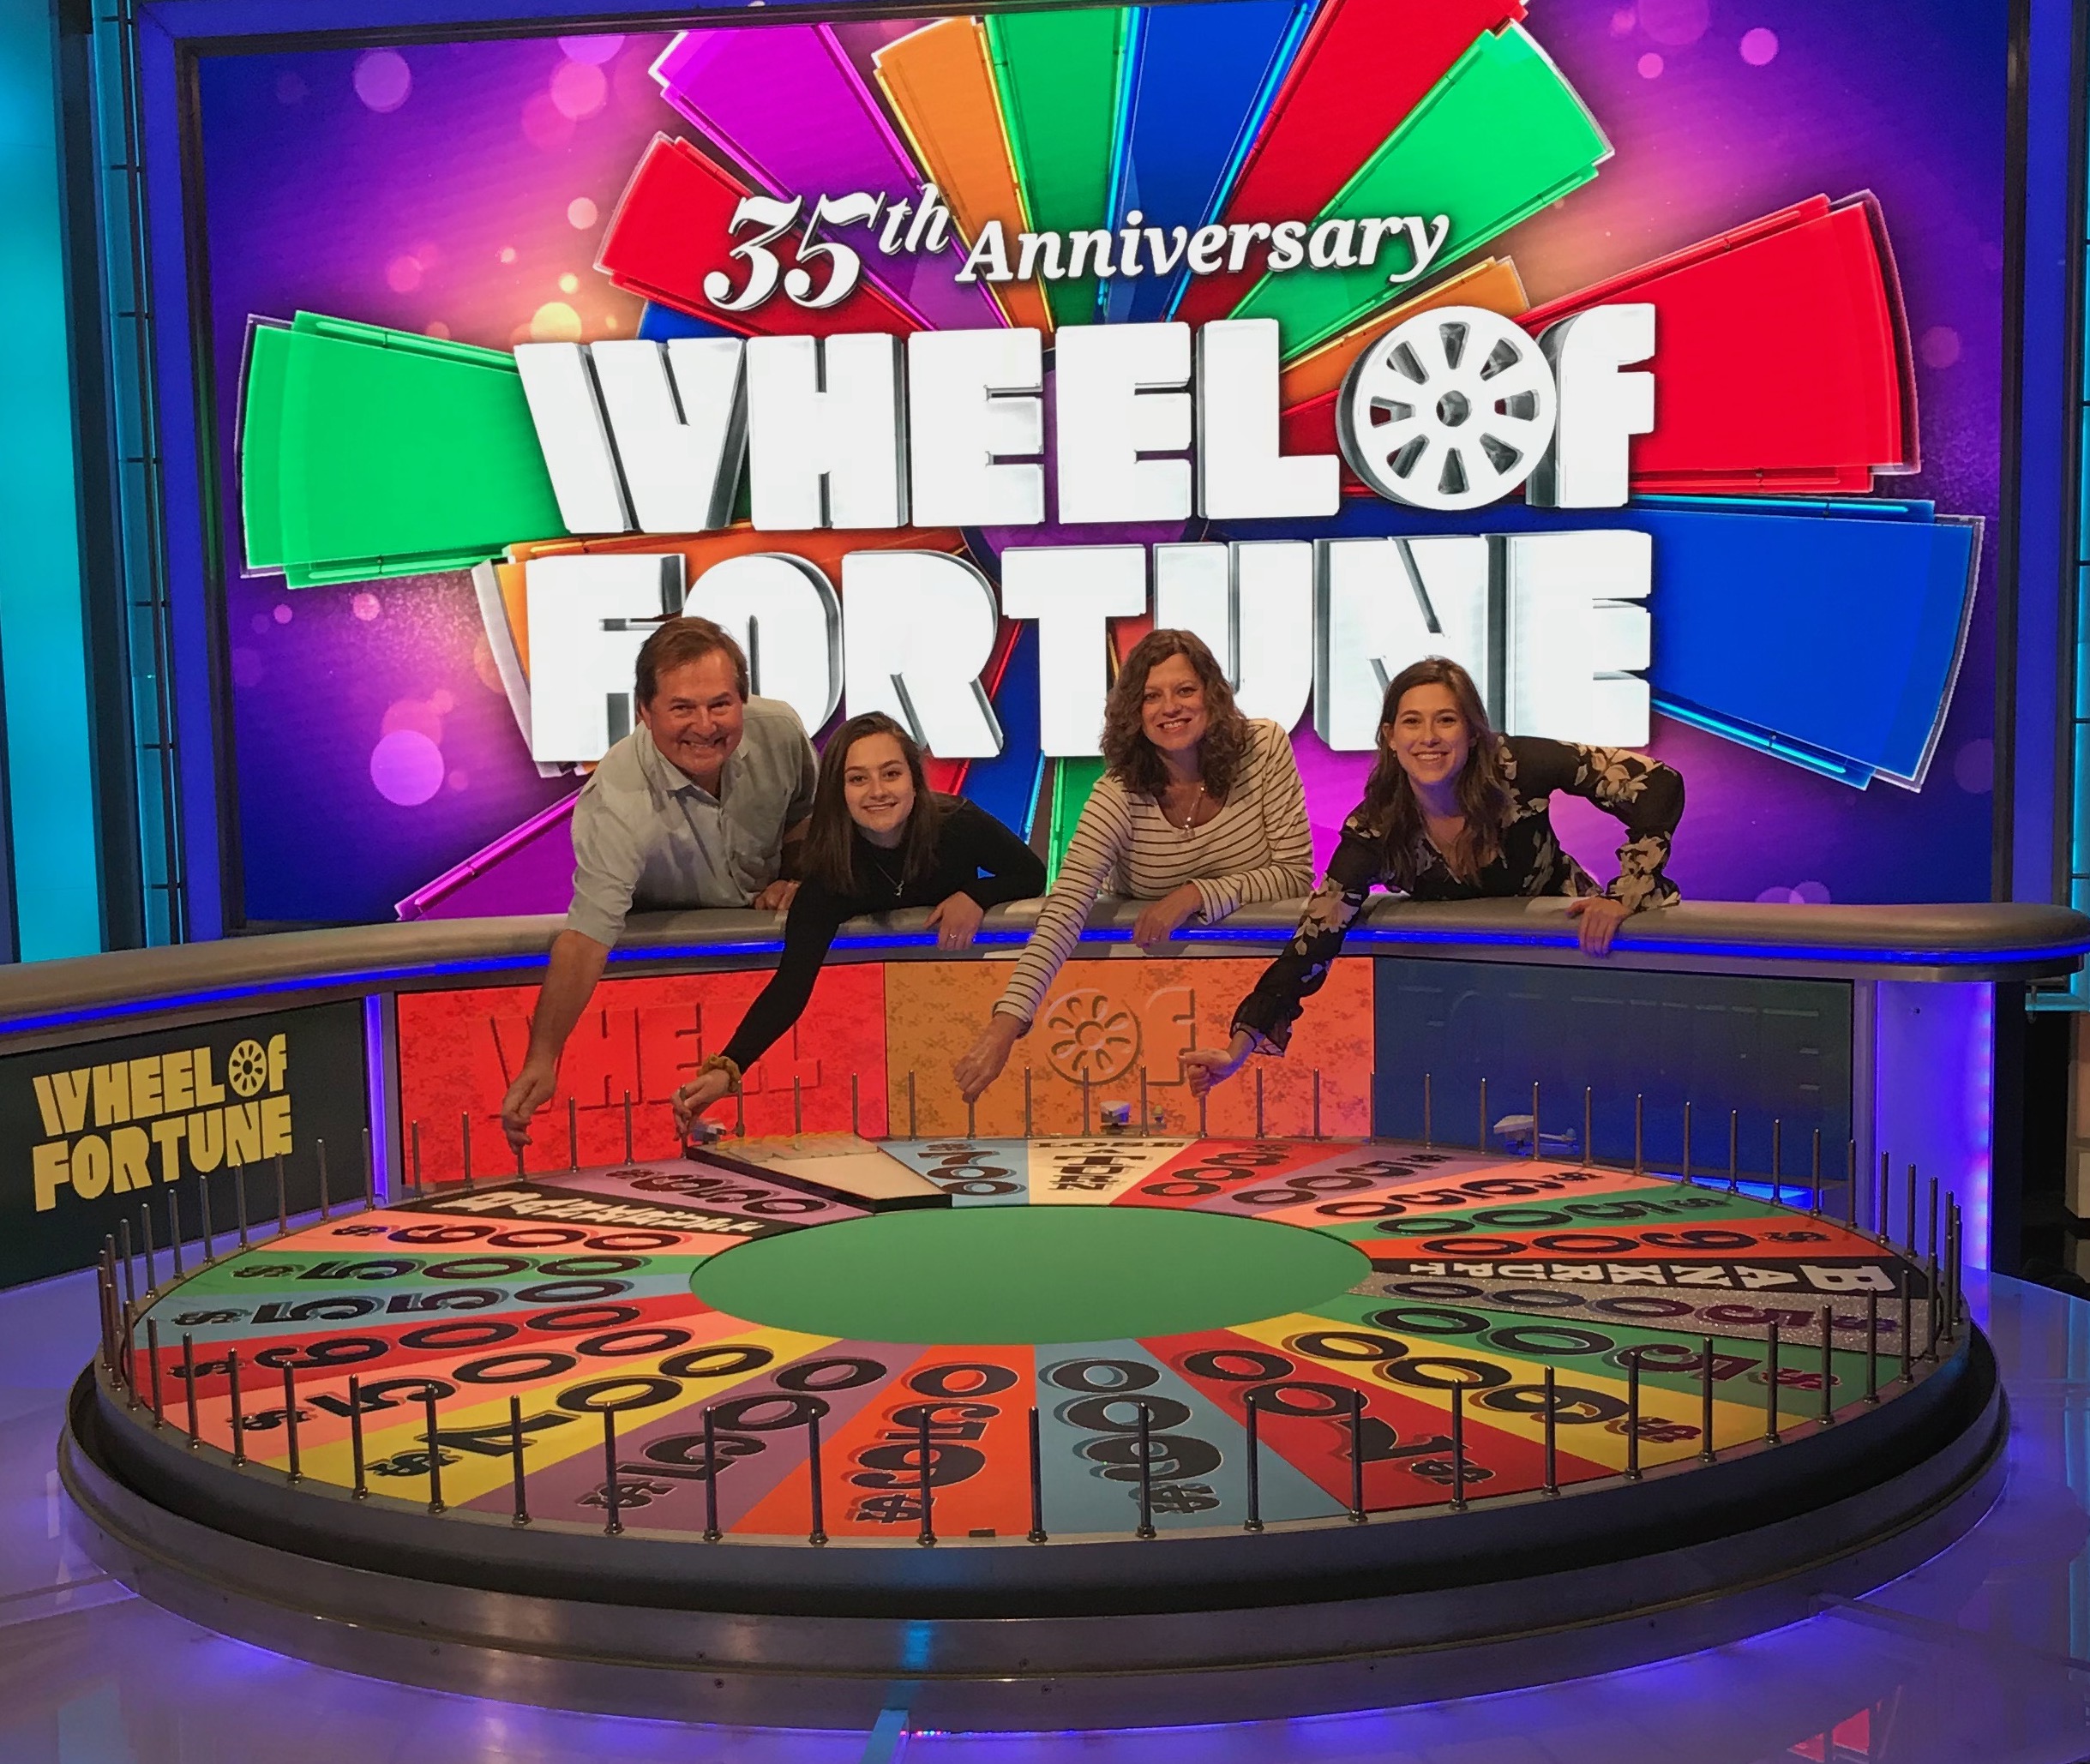 Erica Laible with Family at Wheel of Fortune